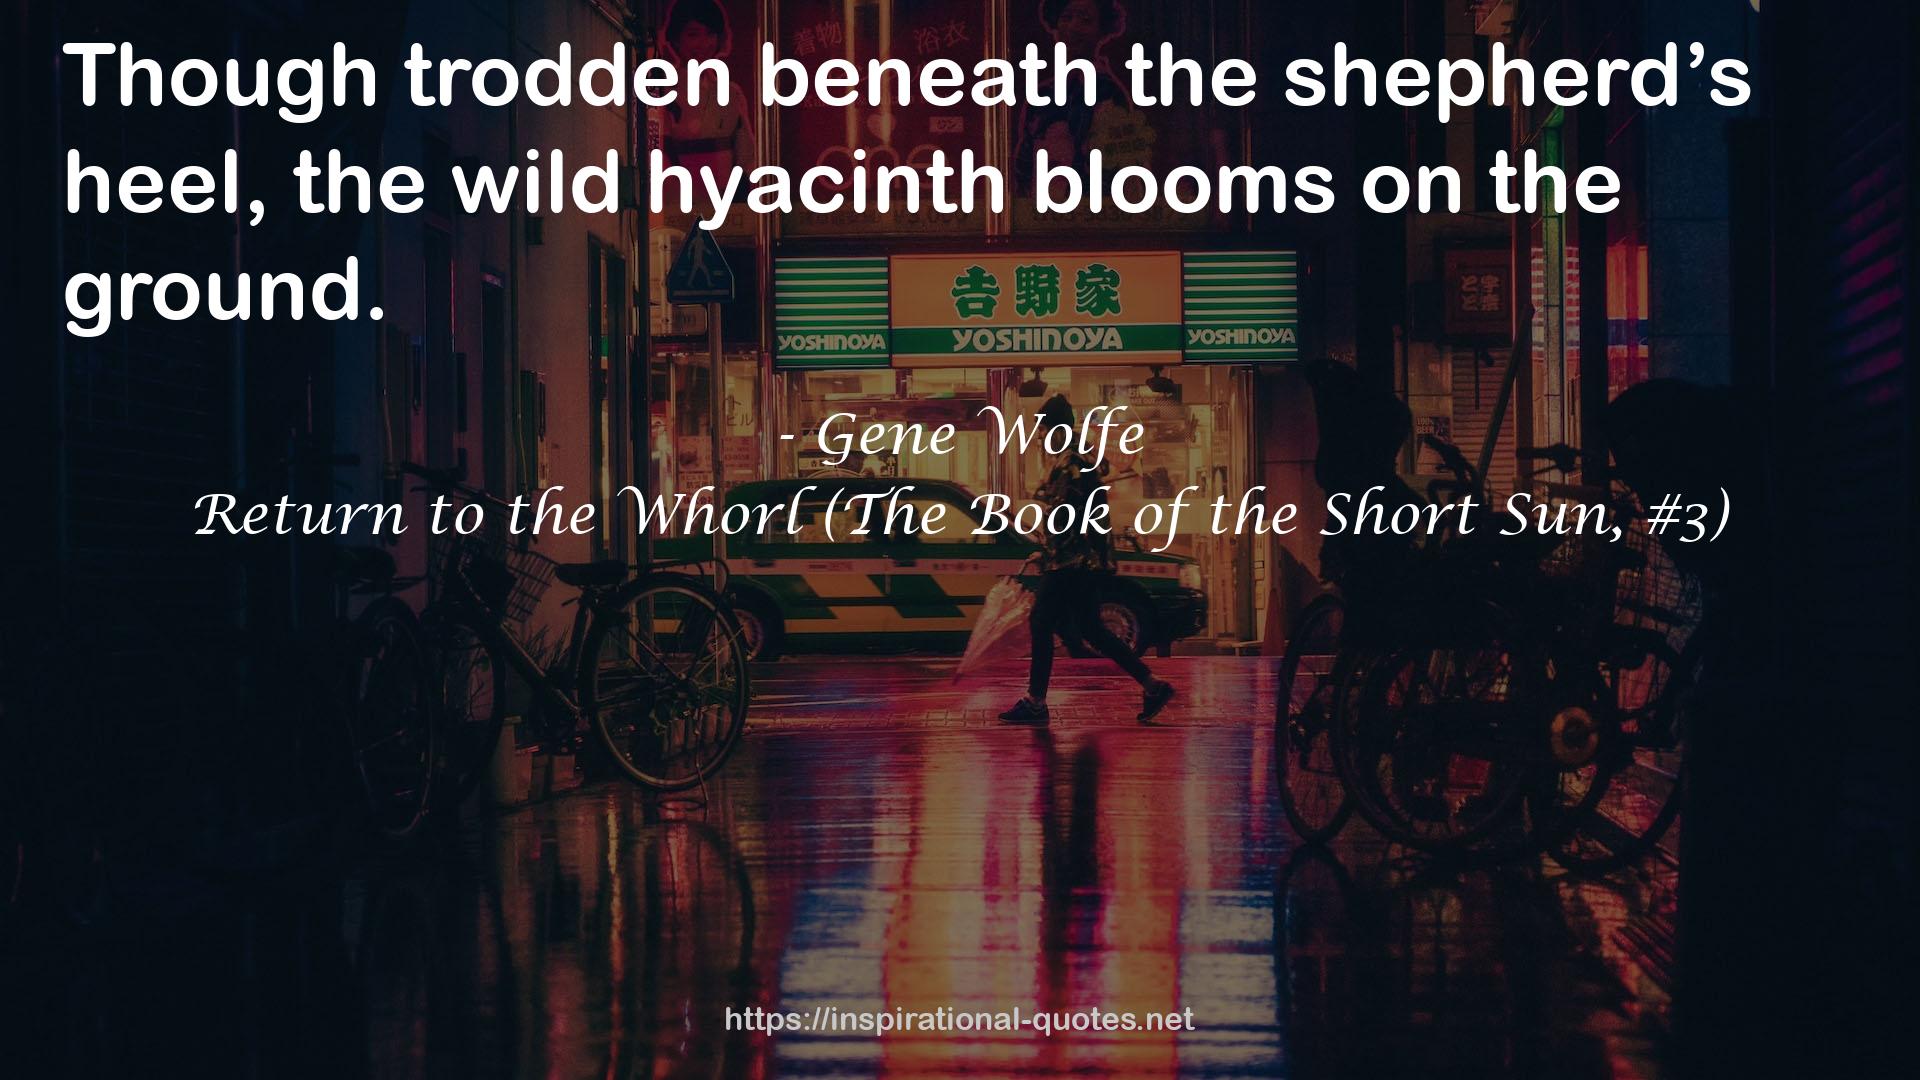 Return to the Whorl (The Book of the Short Sun, #3) QUOTES